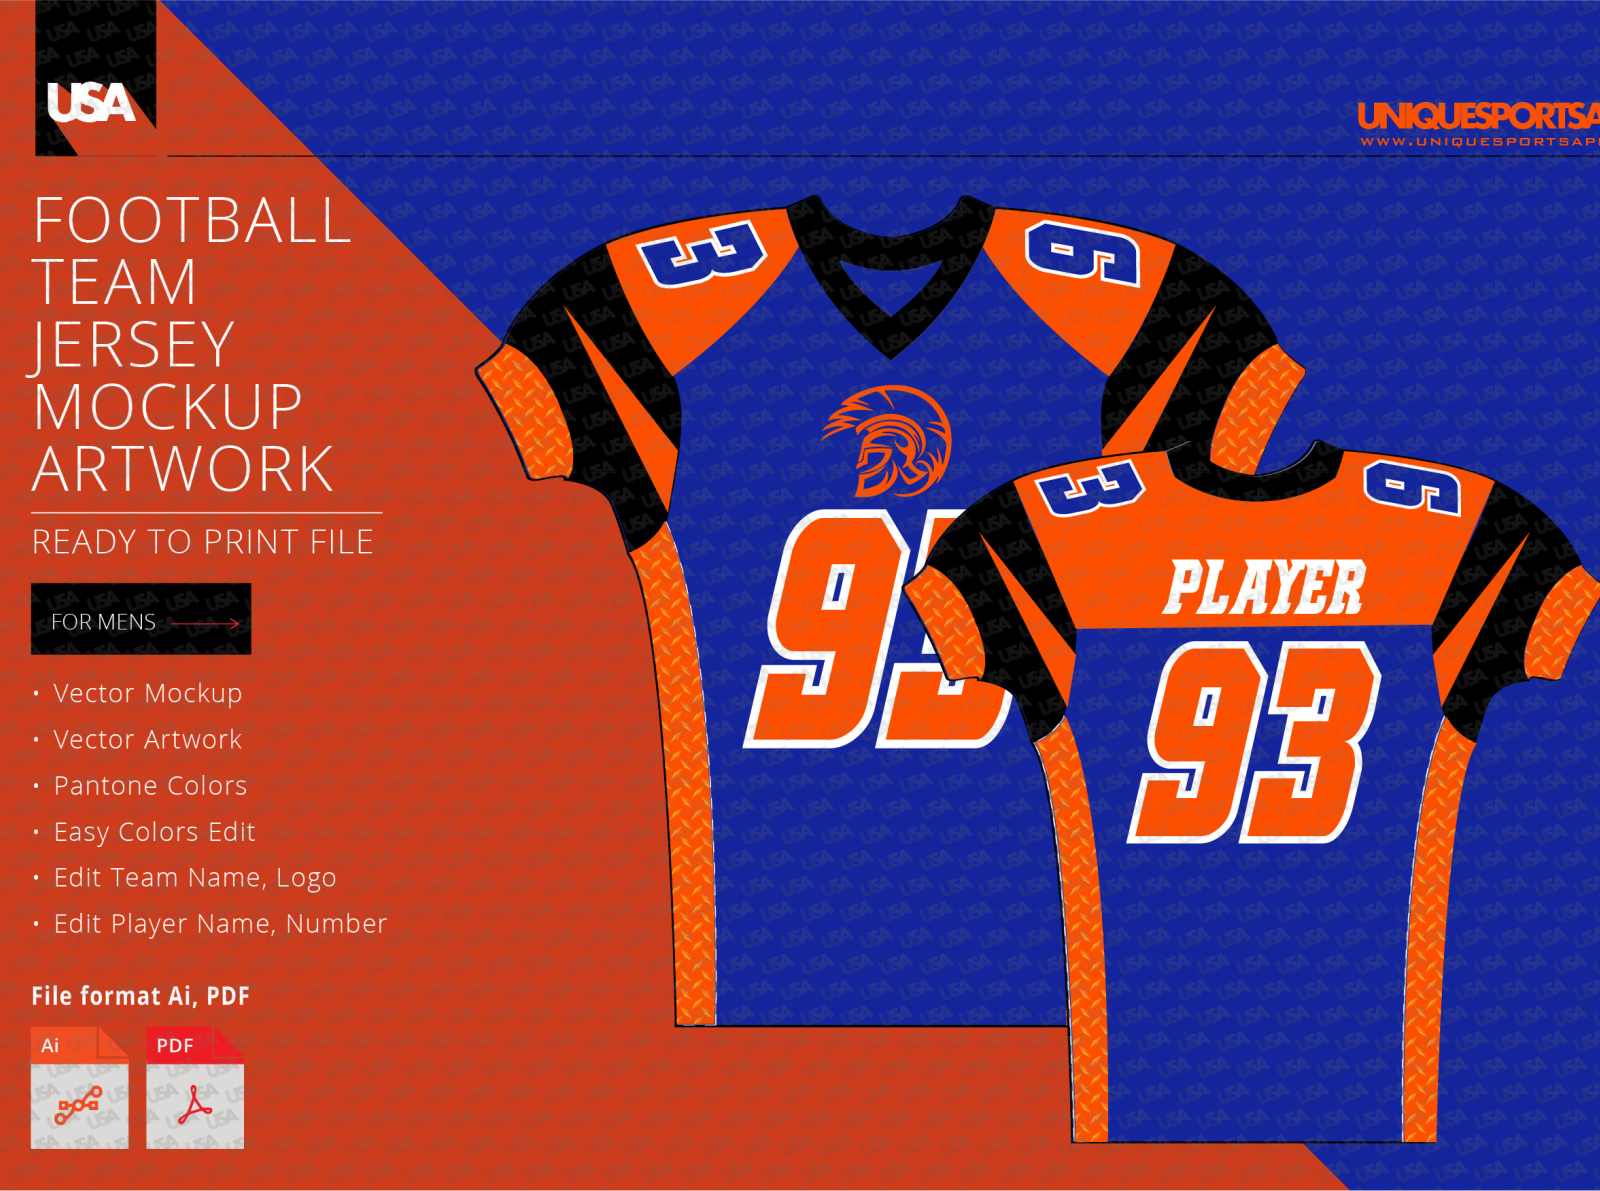 Download WARRIORS FOOTBALL COMPRESSION JERSEY DESIGN MOCKUP by Unique Sports Apparel on Dribbble